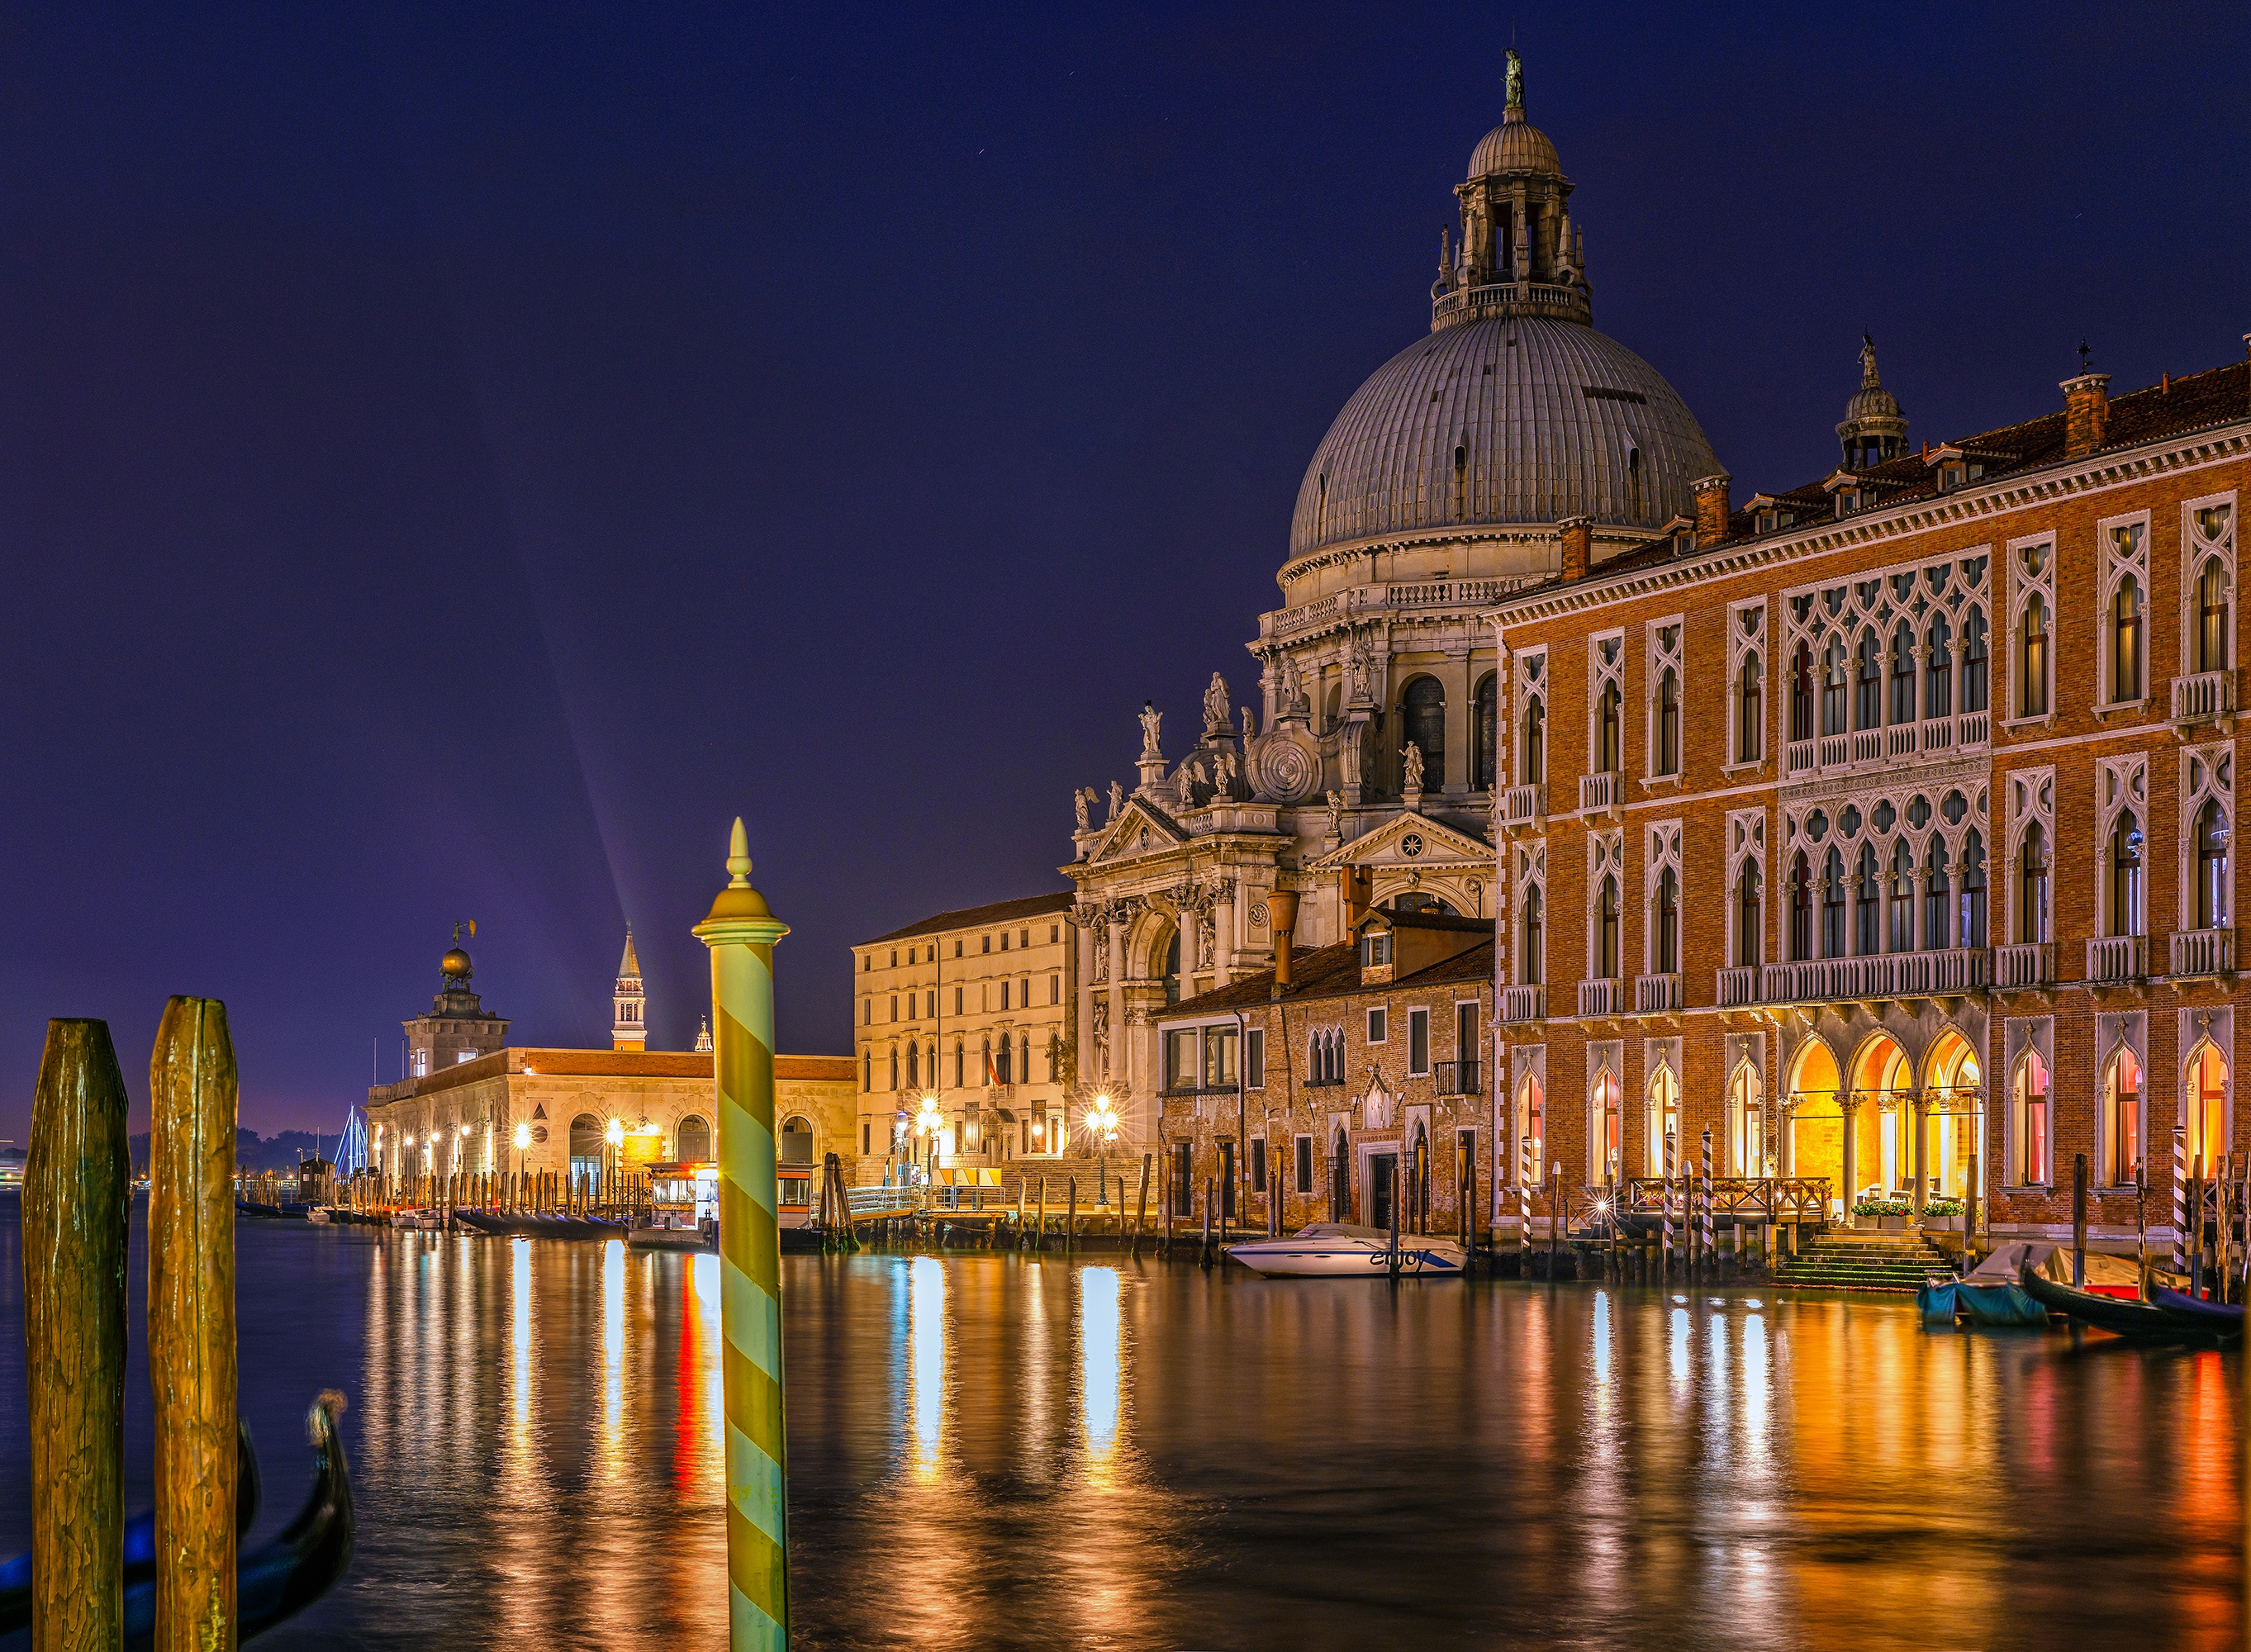 italy, dome, man made, venice, architecture, building, city, grand canal, night, cities